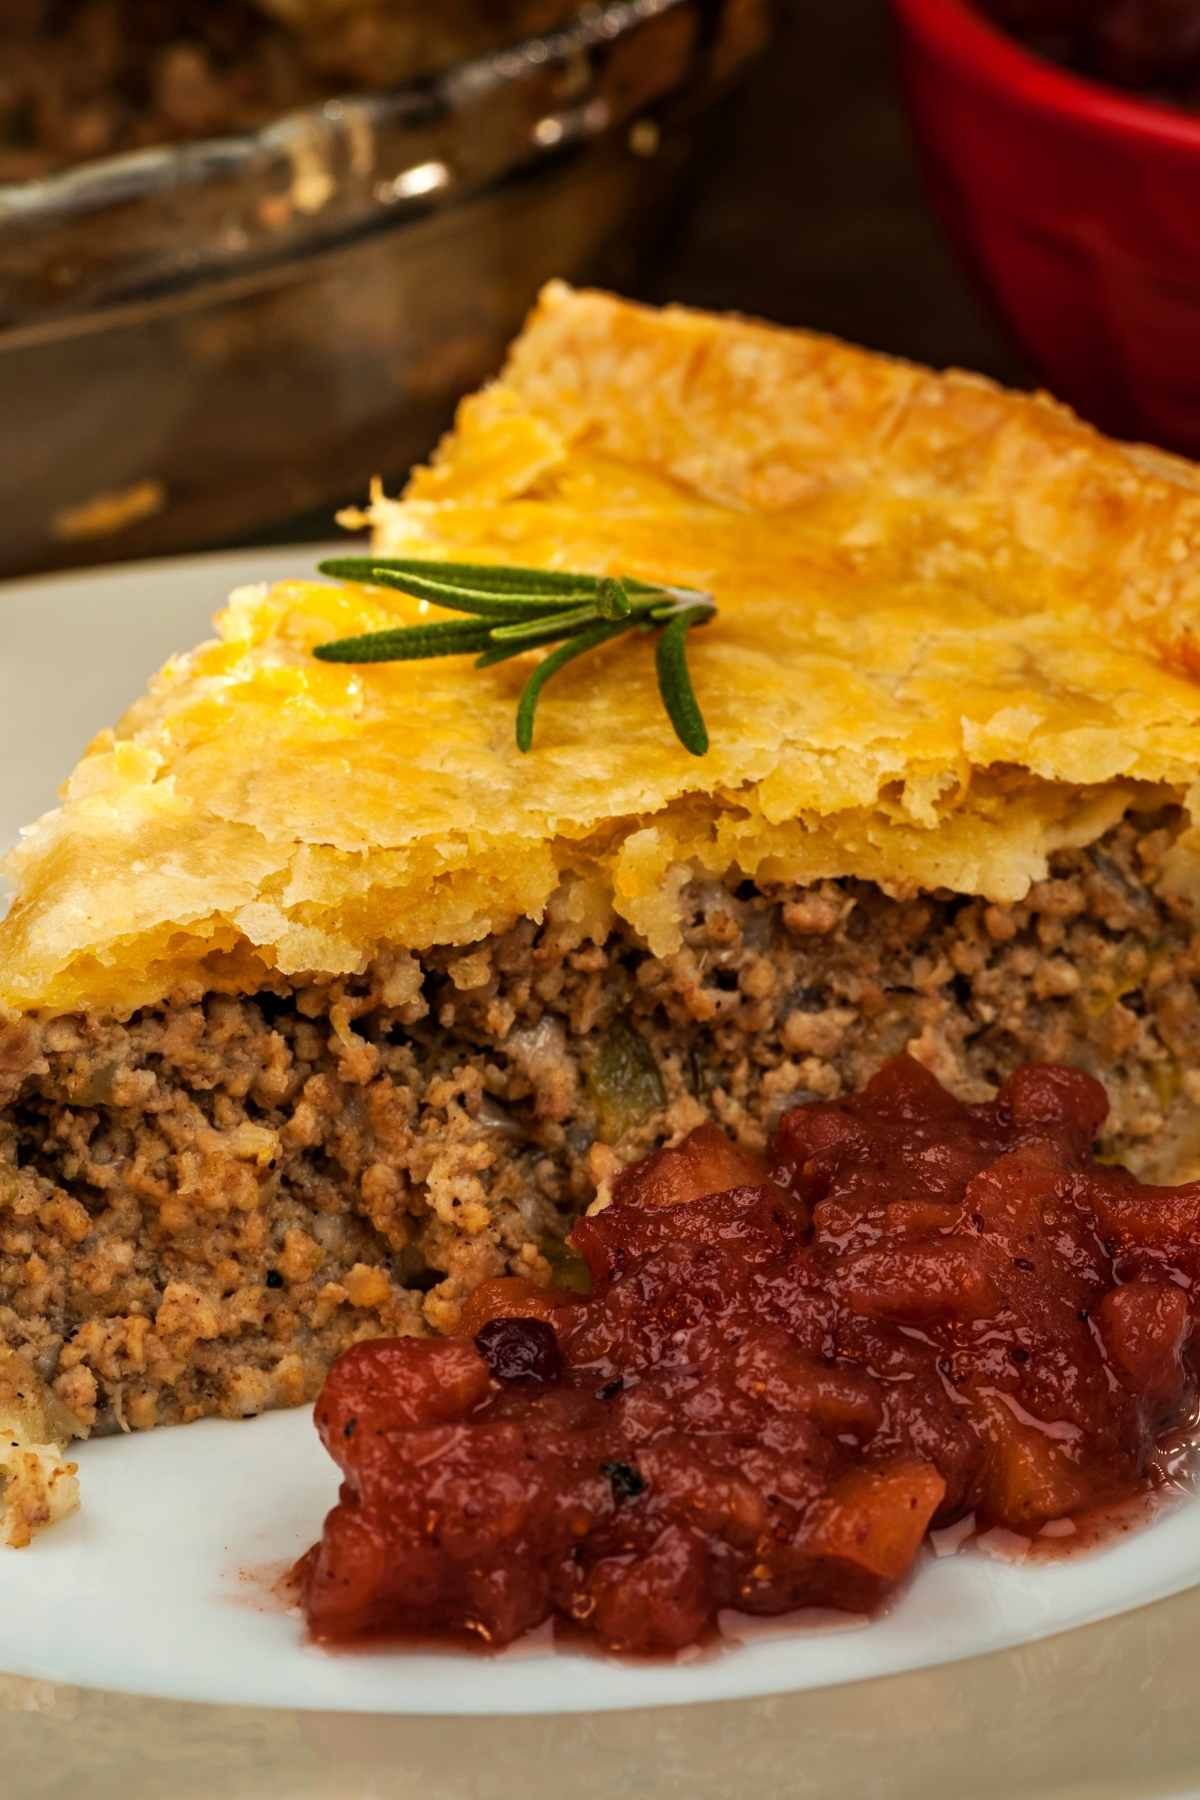 Impossible Hamburger Pie is sure to become one of your family’s favorite meals. You’ll love it for how quick and easy it is to pull together. Serve it during the week when you're strapped for time.